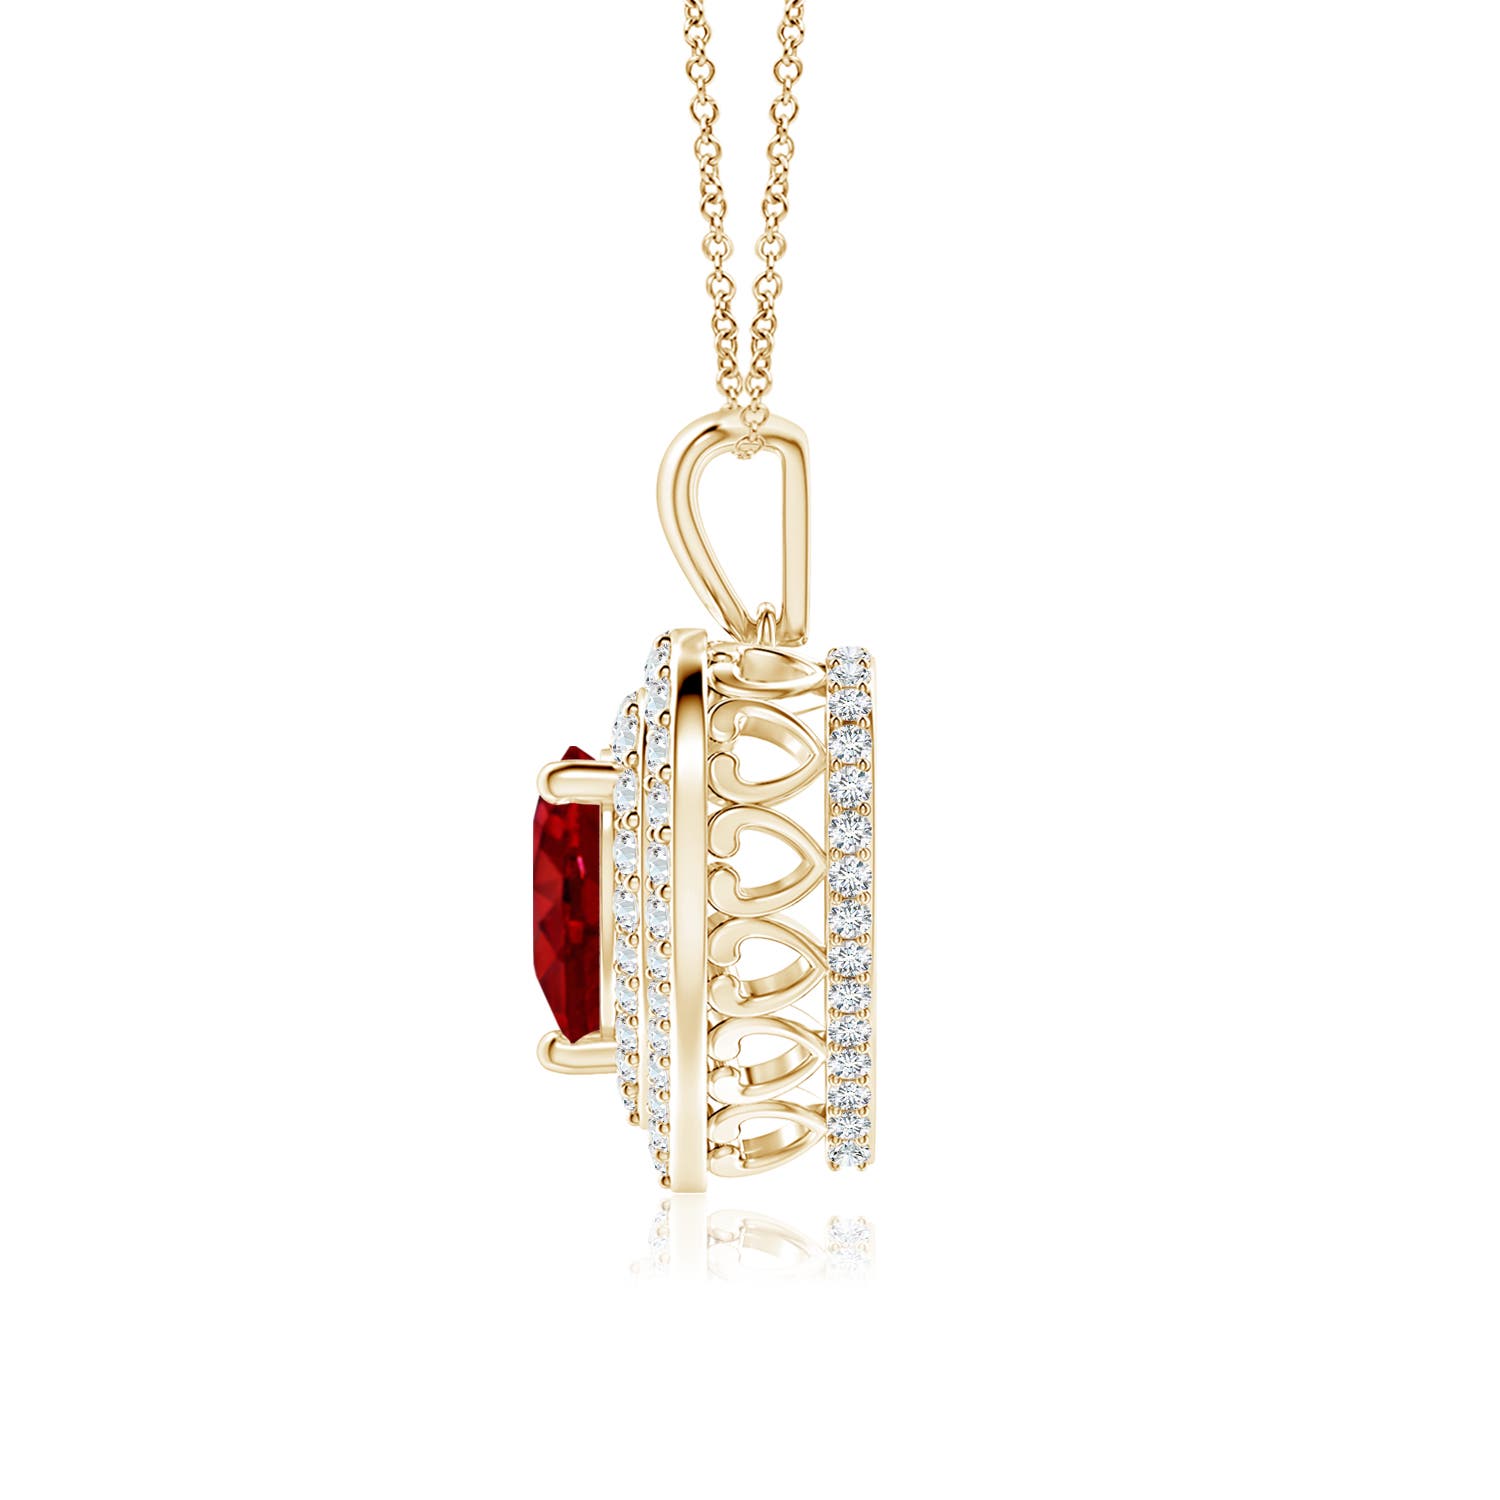 AAAA - Ruby / 2.08 CT / 14 KT Yellow Gold